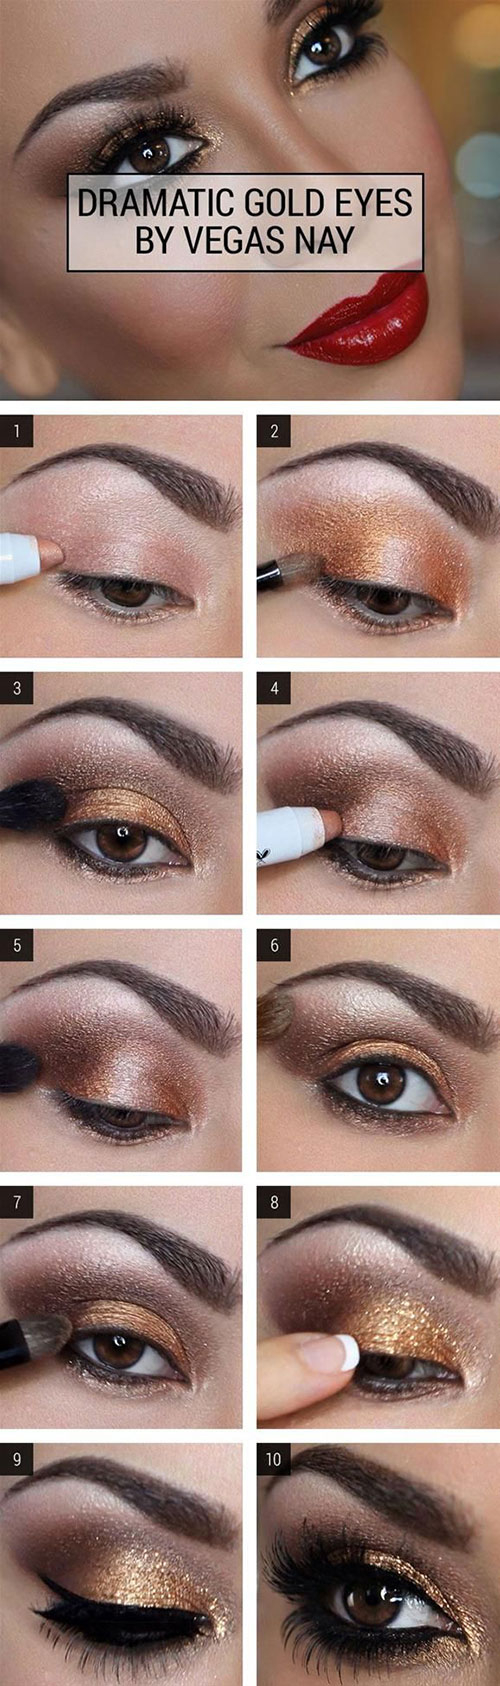 Simple Brown Eye Makeup Tutorial How To Do Smokey Eye Makeup Top 10 Tutorial Pictures For 2019